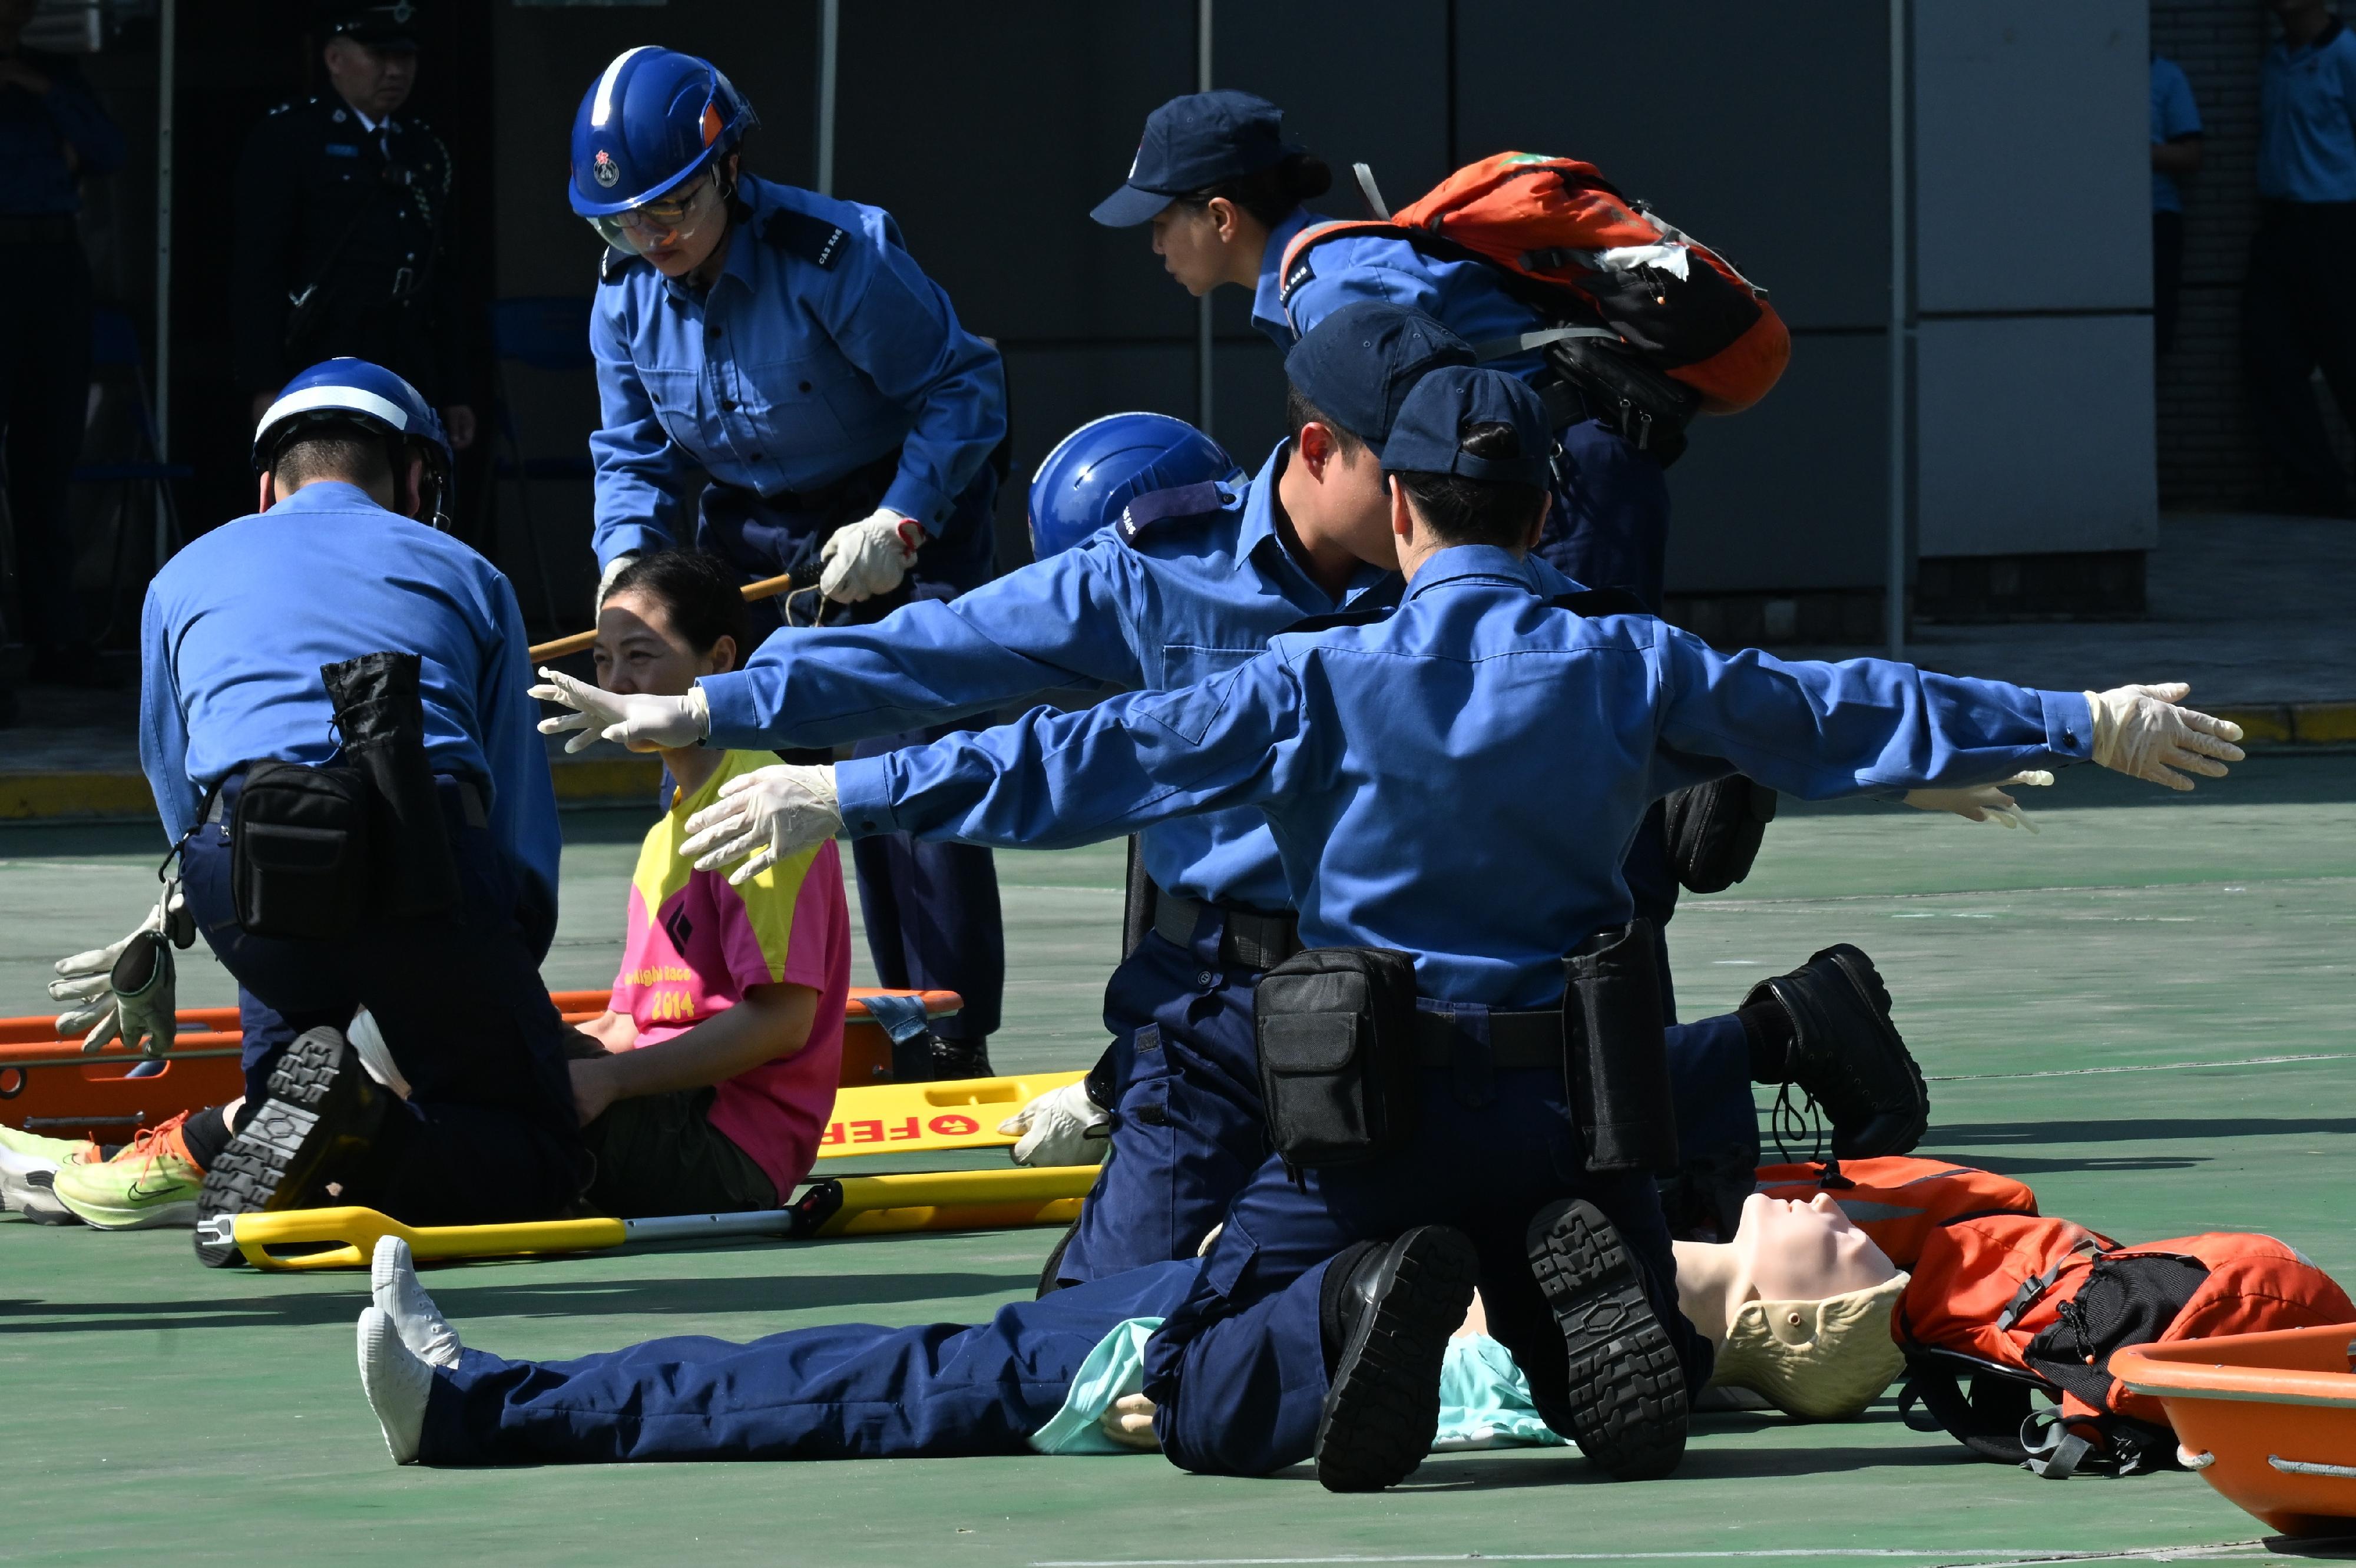 The Civil Aid Service held the 87th Recruits Passing-out Parade at its headquarters today (March 24). Photo shows the recruits performing a rescue demonstration.